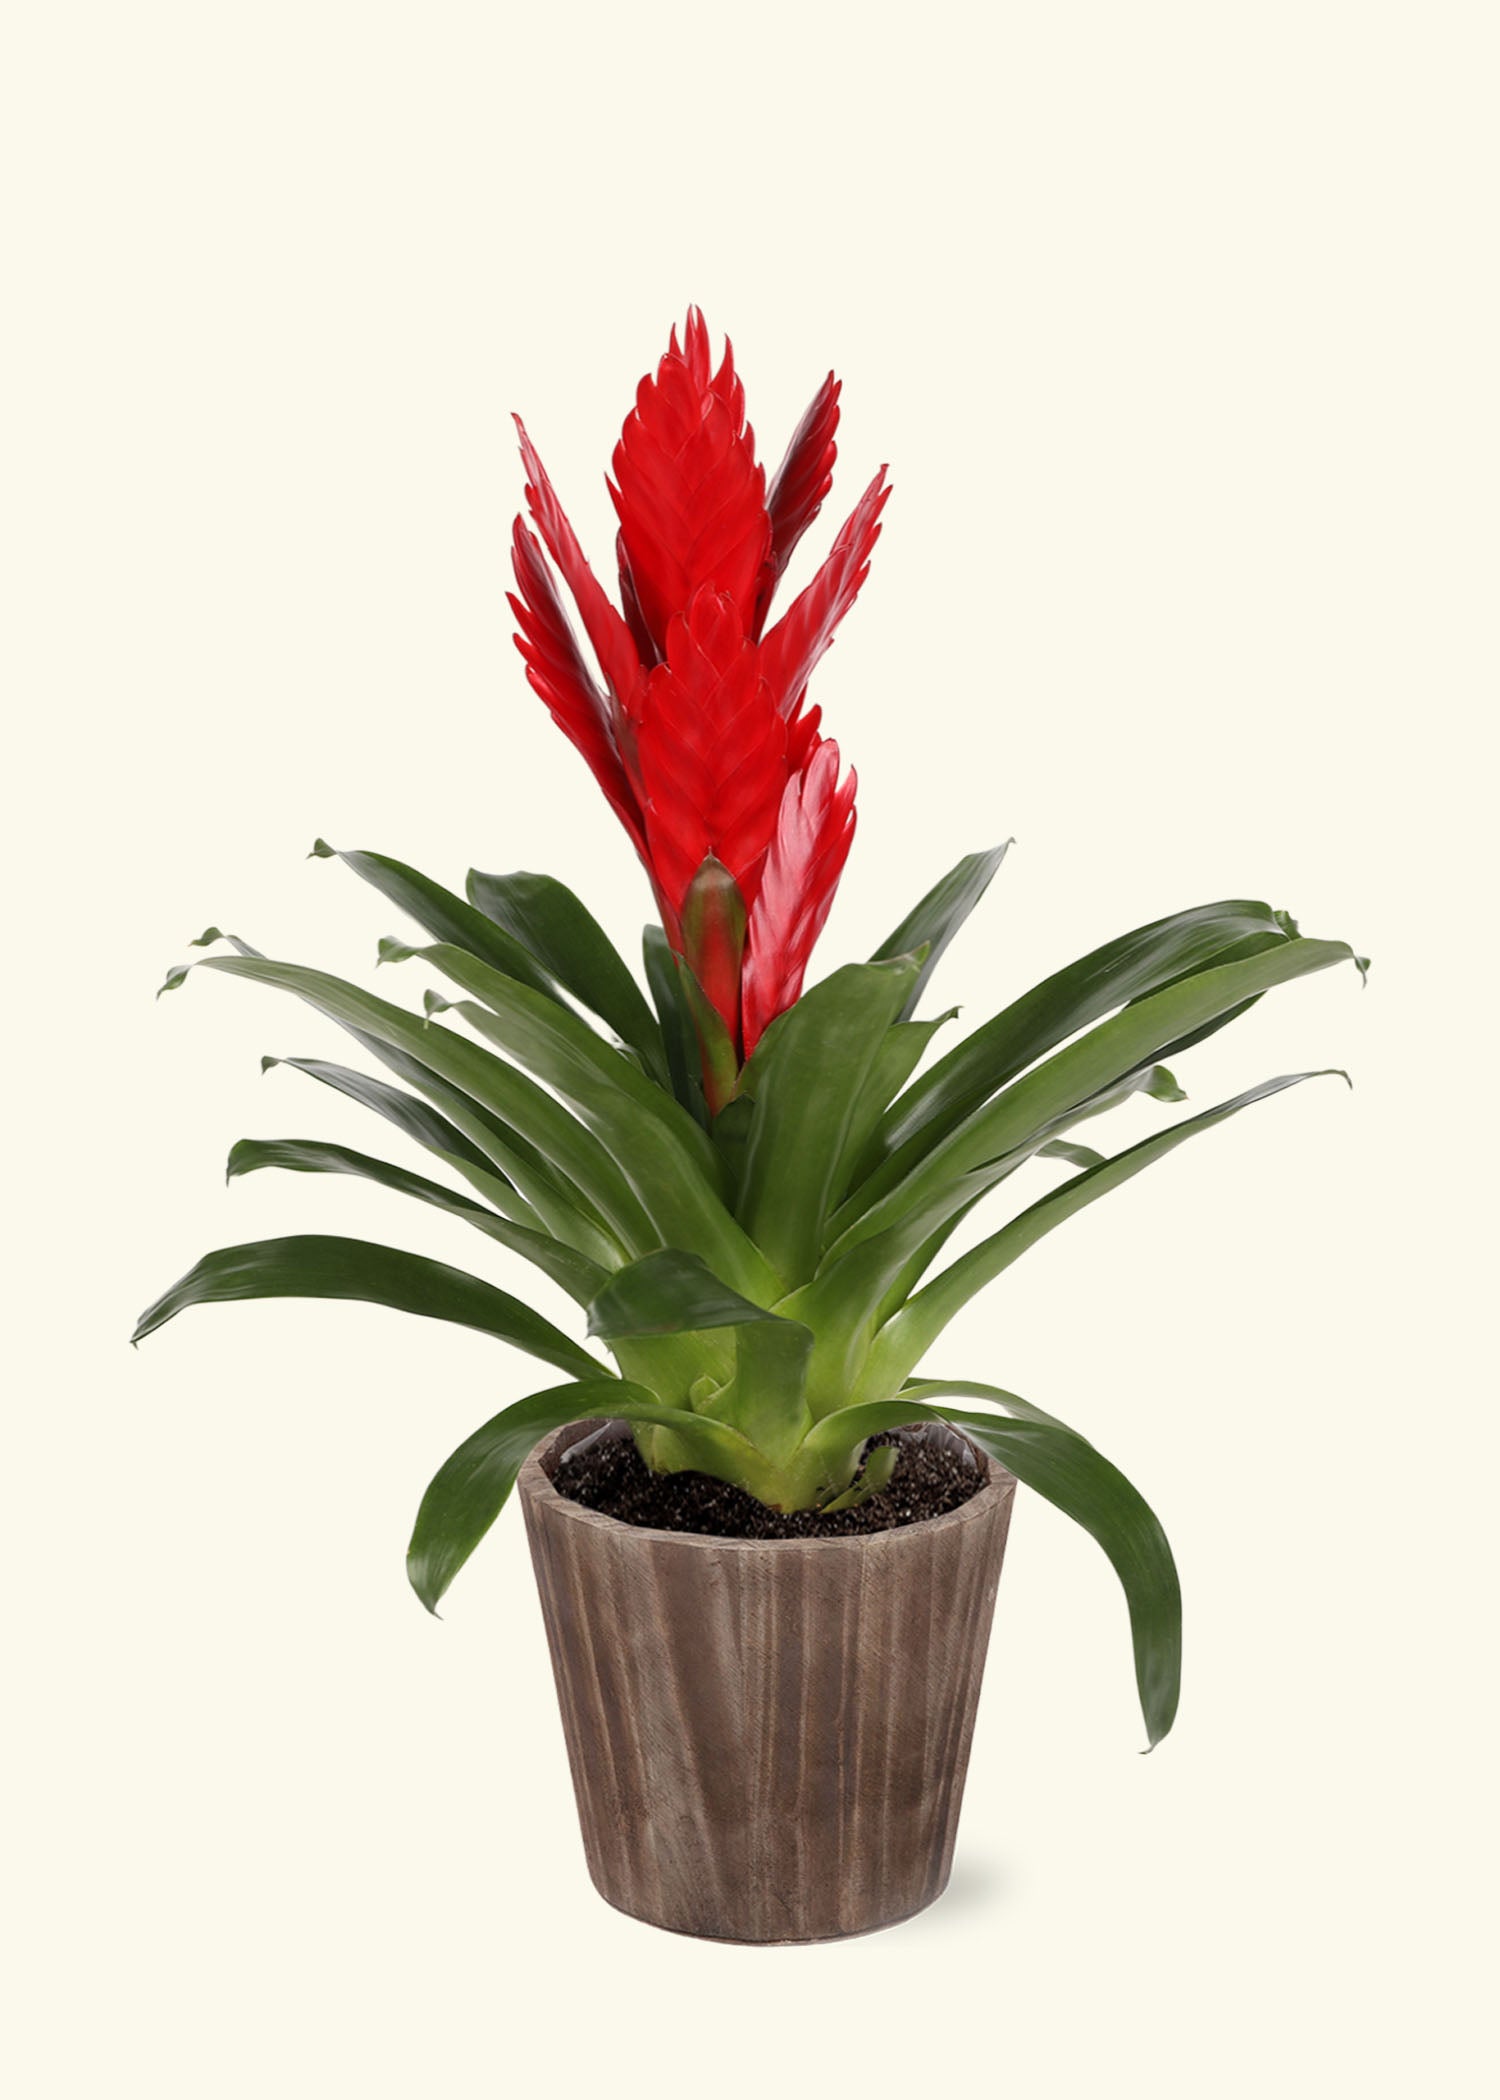 Small Red Bromeliad in a brown wilson wood grow pot.